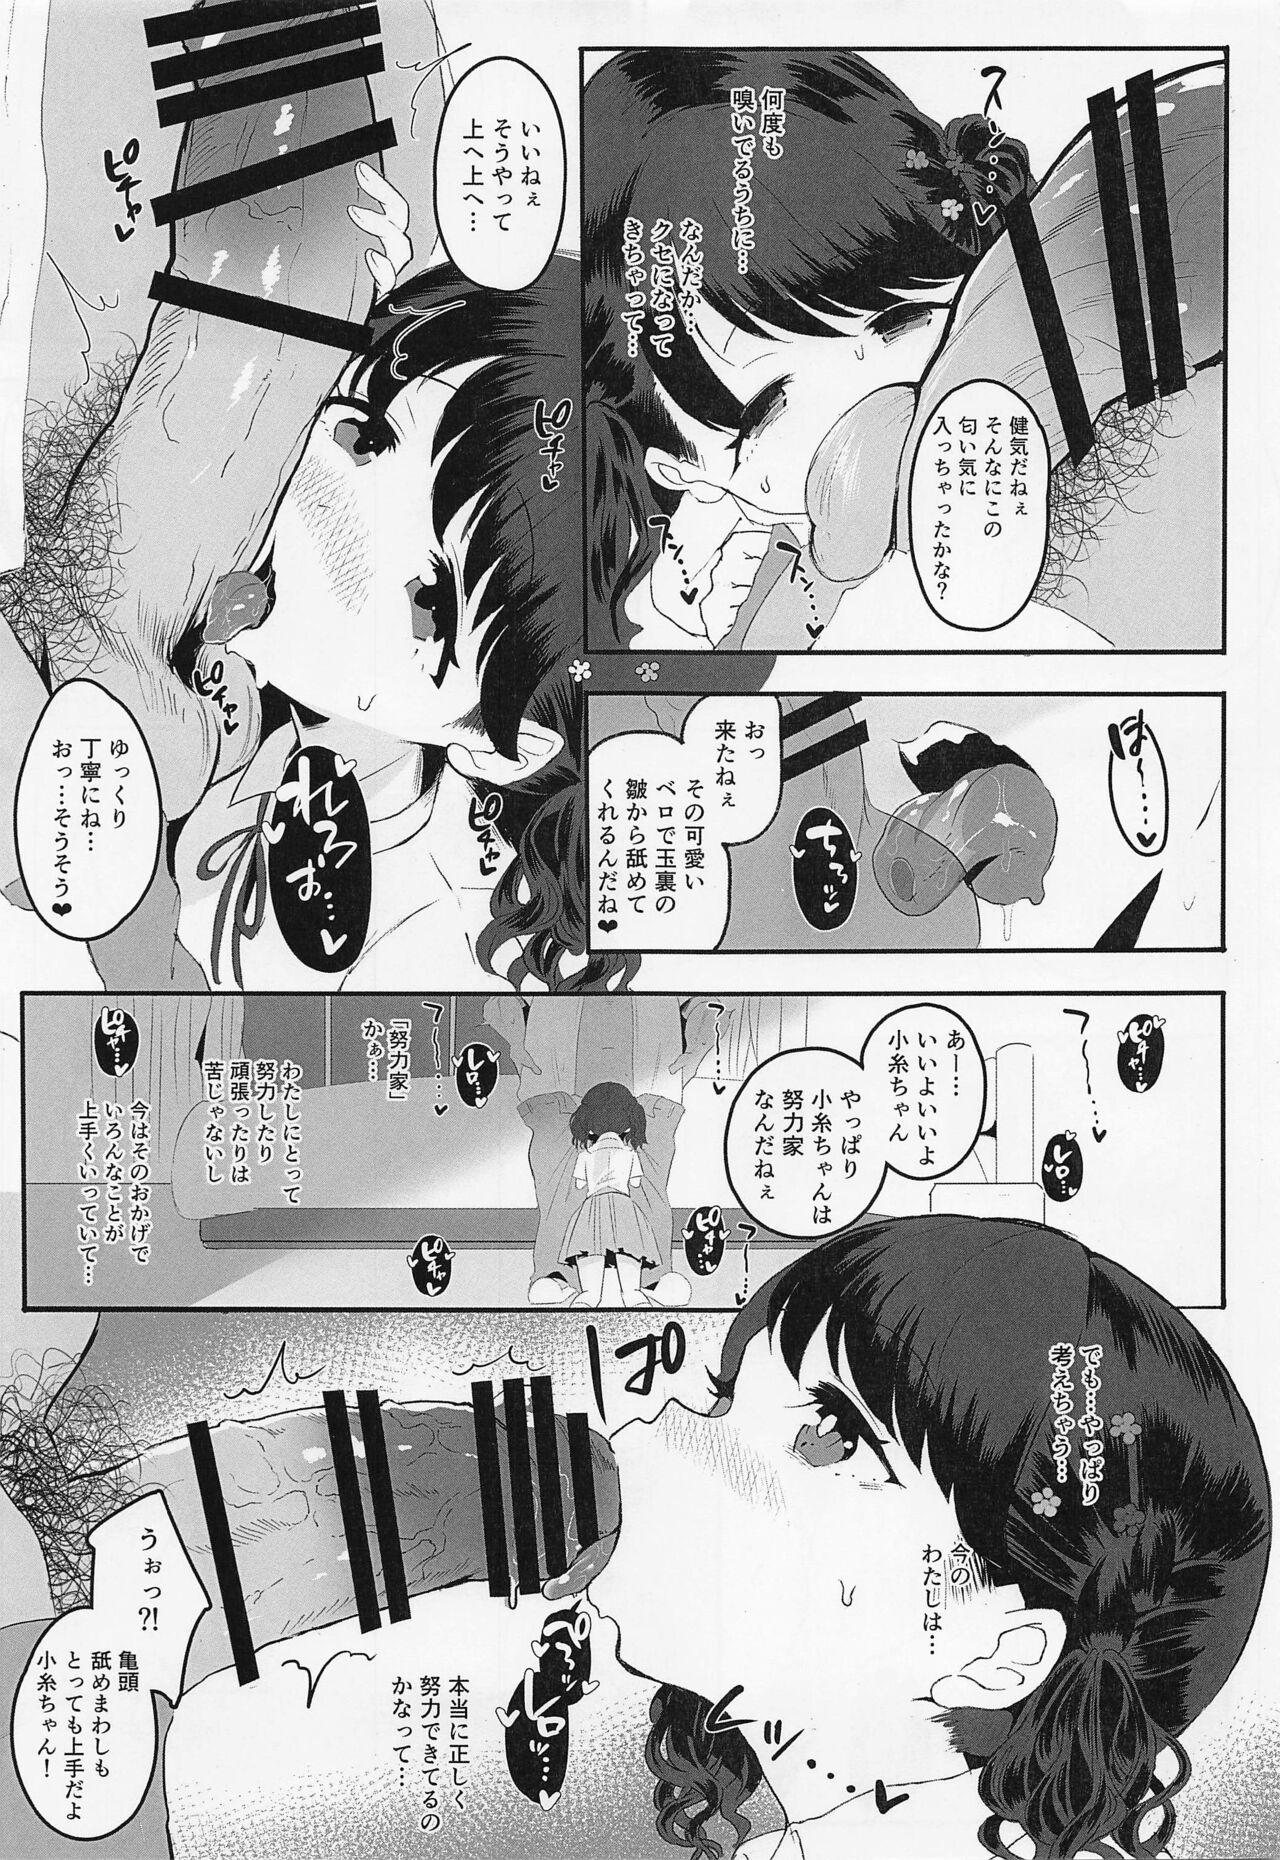 Pounded Majime de Doryokuka datte. 2 - The idolmaster Cum Swallowing - Page 4